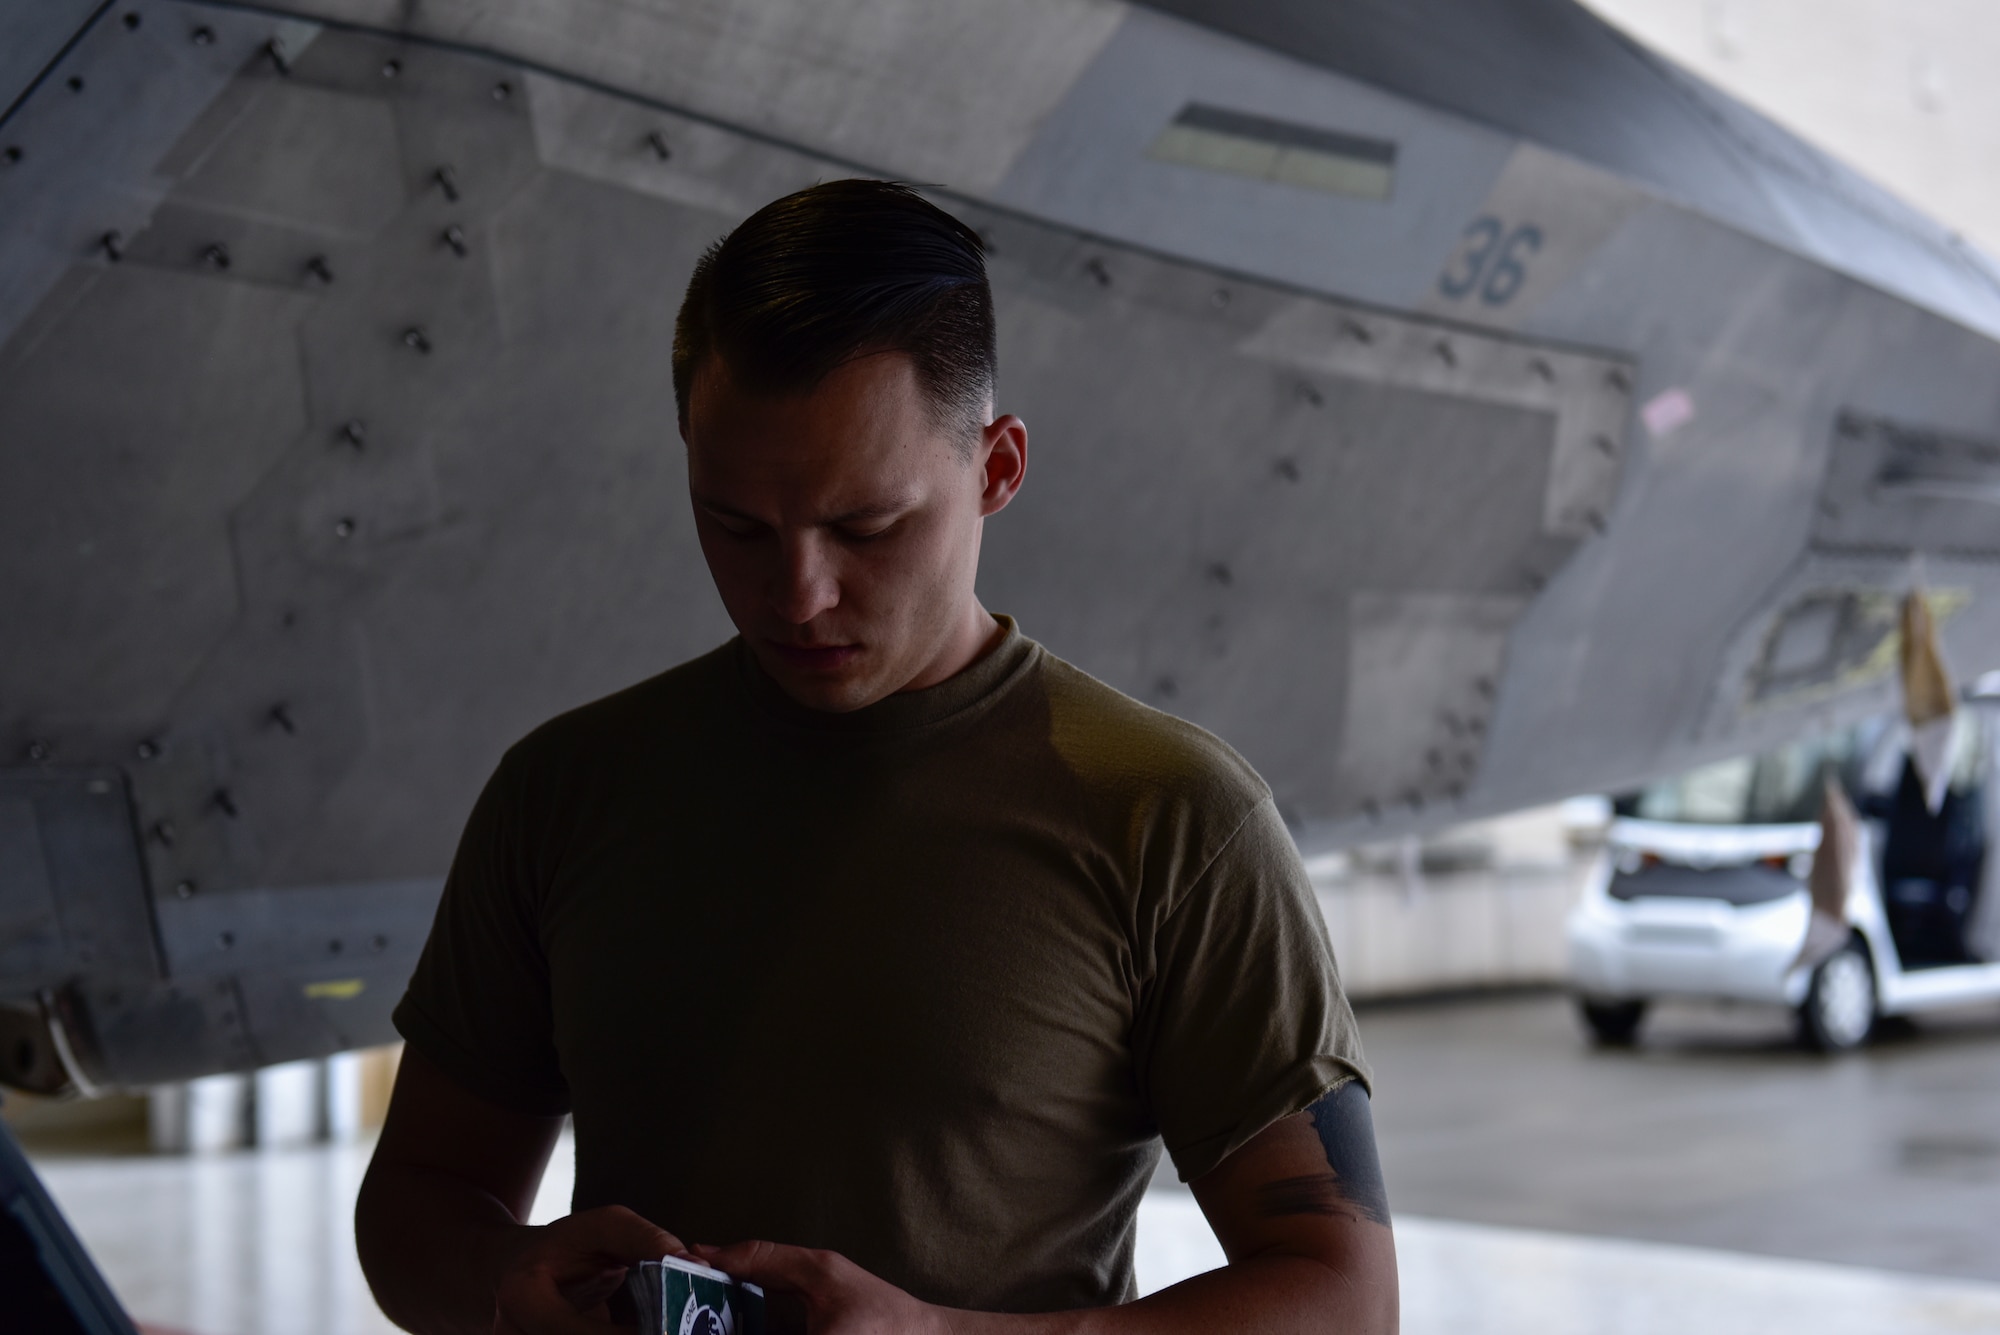 U.S. Air Force Staff Sgt. Jackson Findlay, Tyndall Air Force Base, Fla., 325th Maintenance Squadron crew chief, reviews his notes from the previous days log prior to completing routine maintenance on an F-22 Raptor at Eglin AFB. Fla., Feb. 21, 2019. Some of the F-22s that were stationed at Tyndall AFB were evacuated to Eglin AFB hangars where its’ dedicated crews maintain them until Tyndall hangars are restored. (U.S. Air Force photo by Staff Sgt. Alexandre Montes)